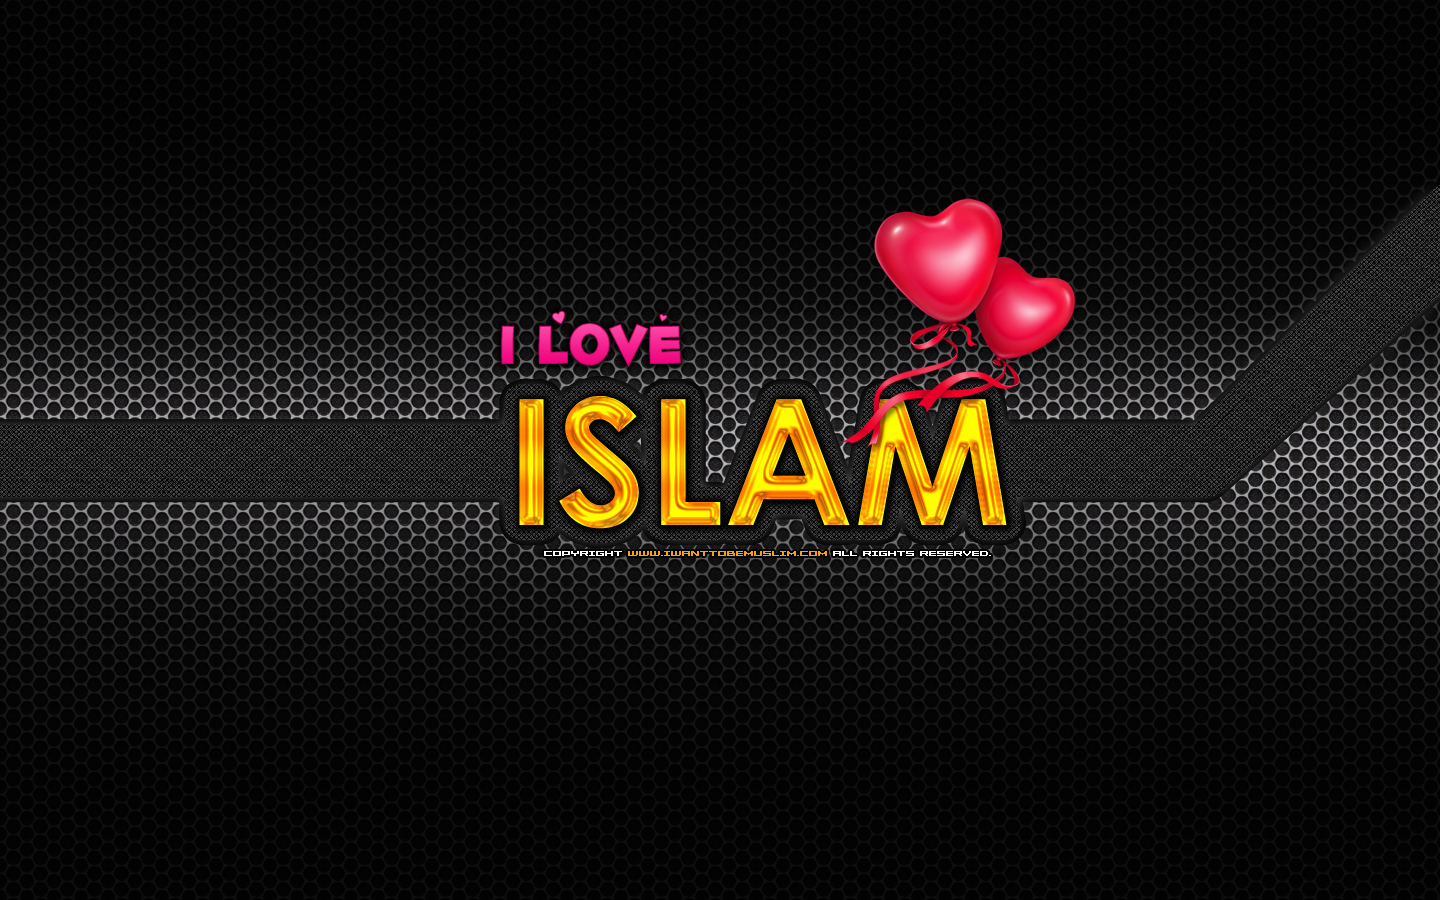 Islam Photos, Download The BEST Free Islam Stock Photos & HD Images